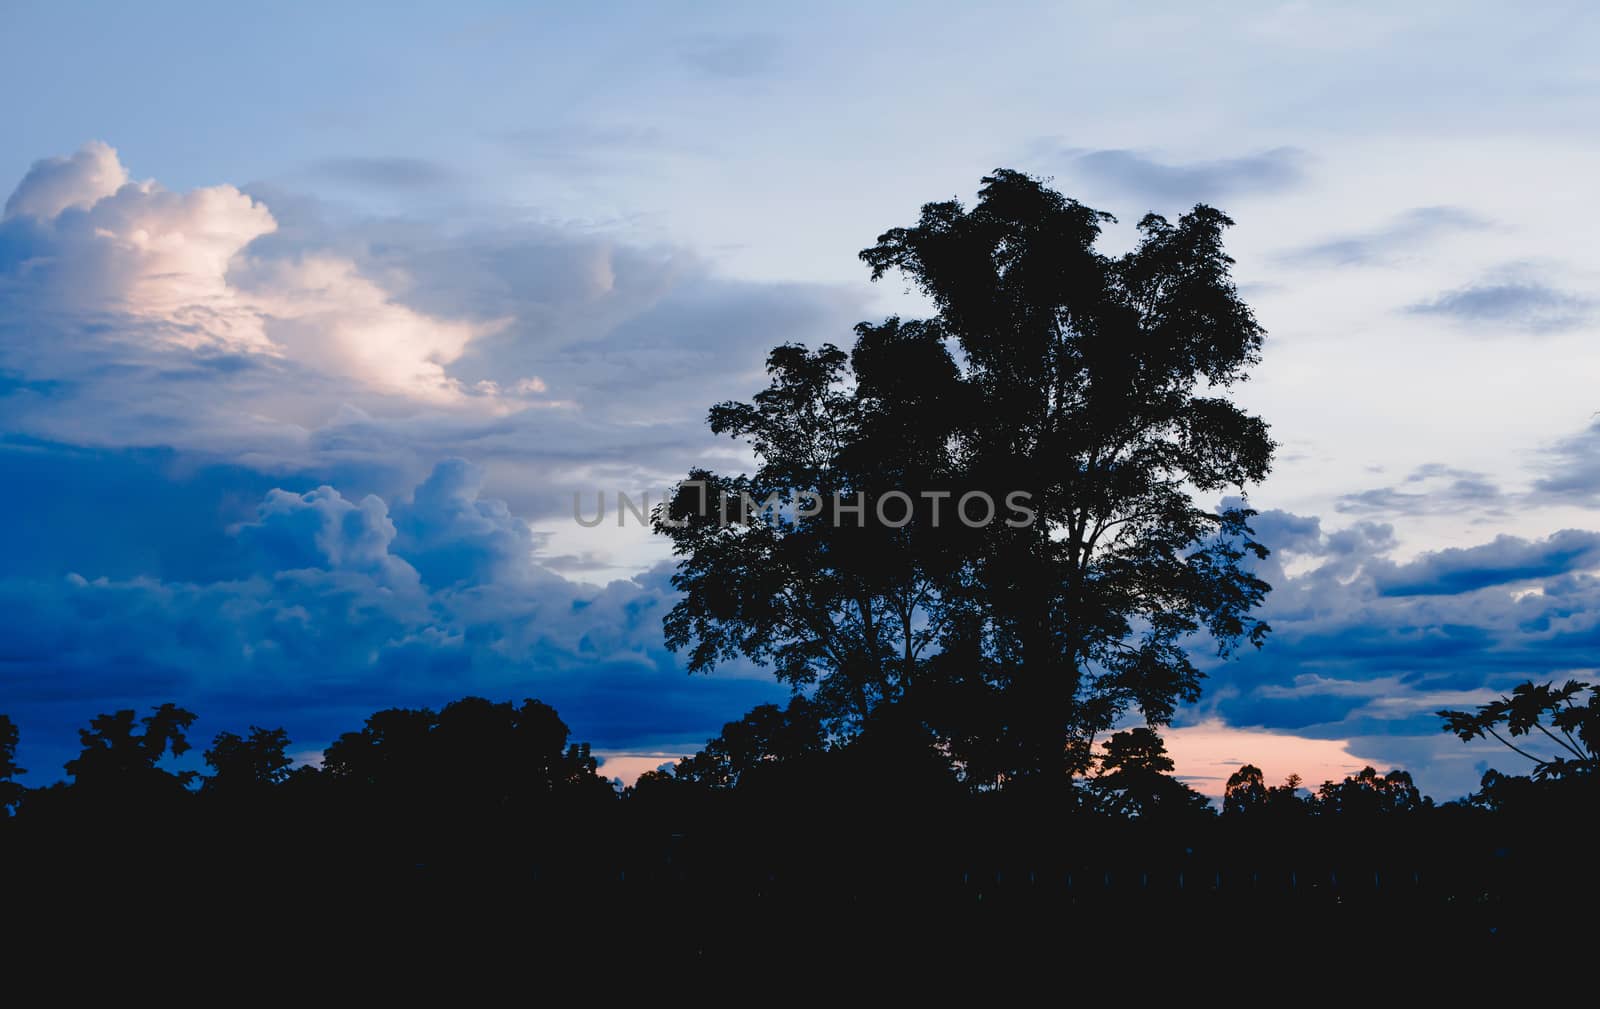 Trees on cloudy with sky at evening background silhouette style.